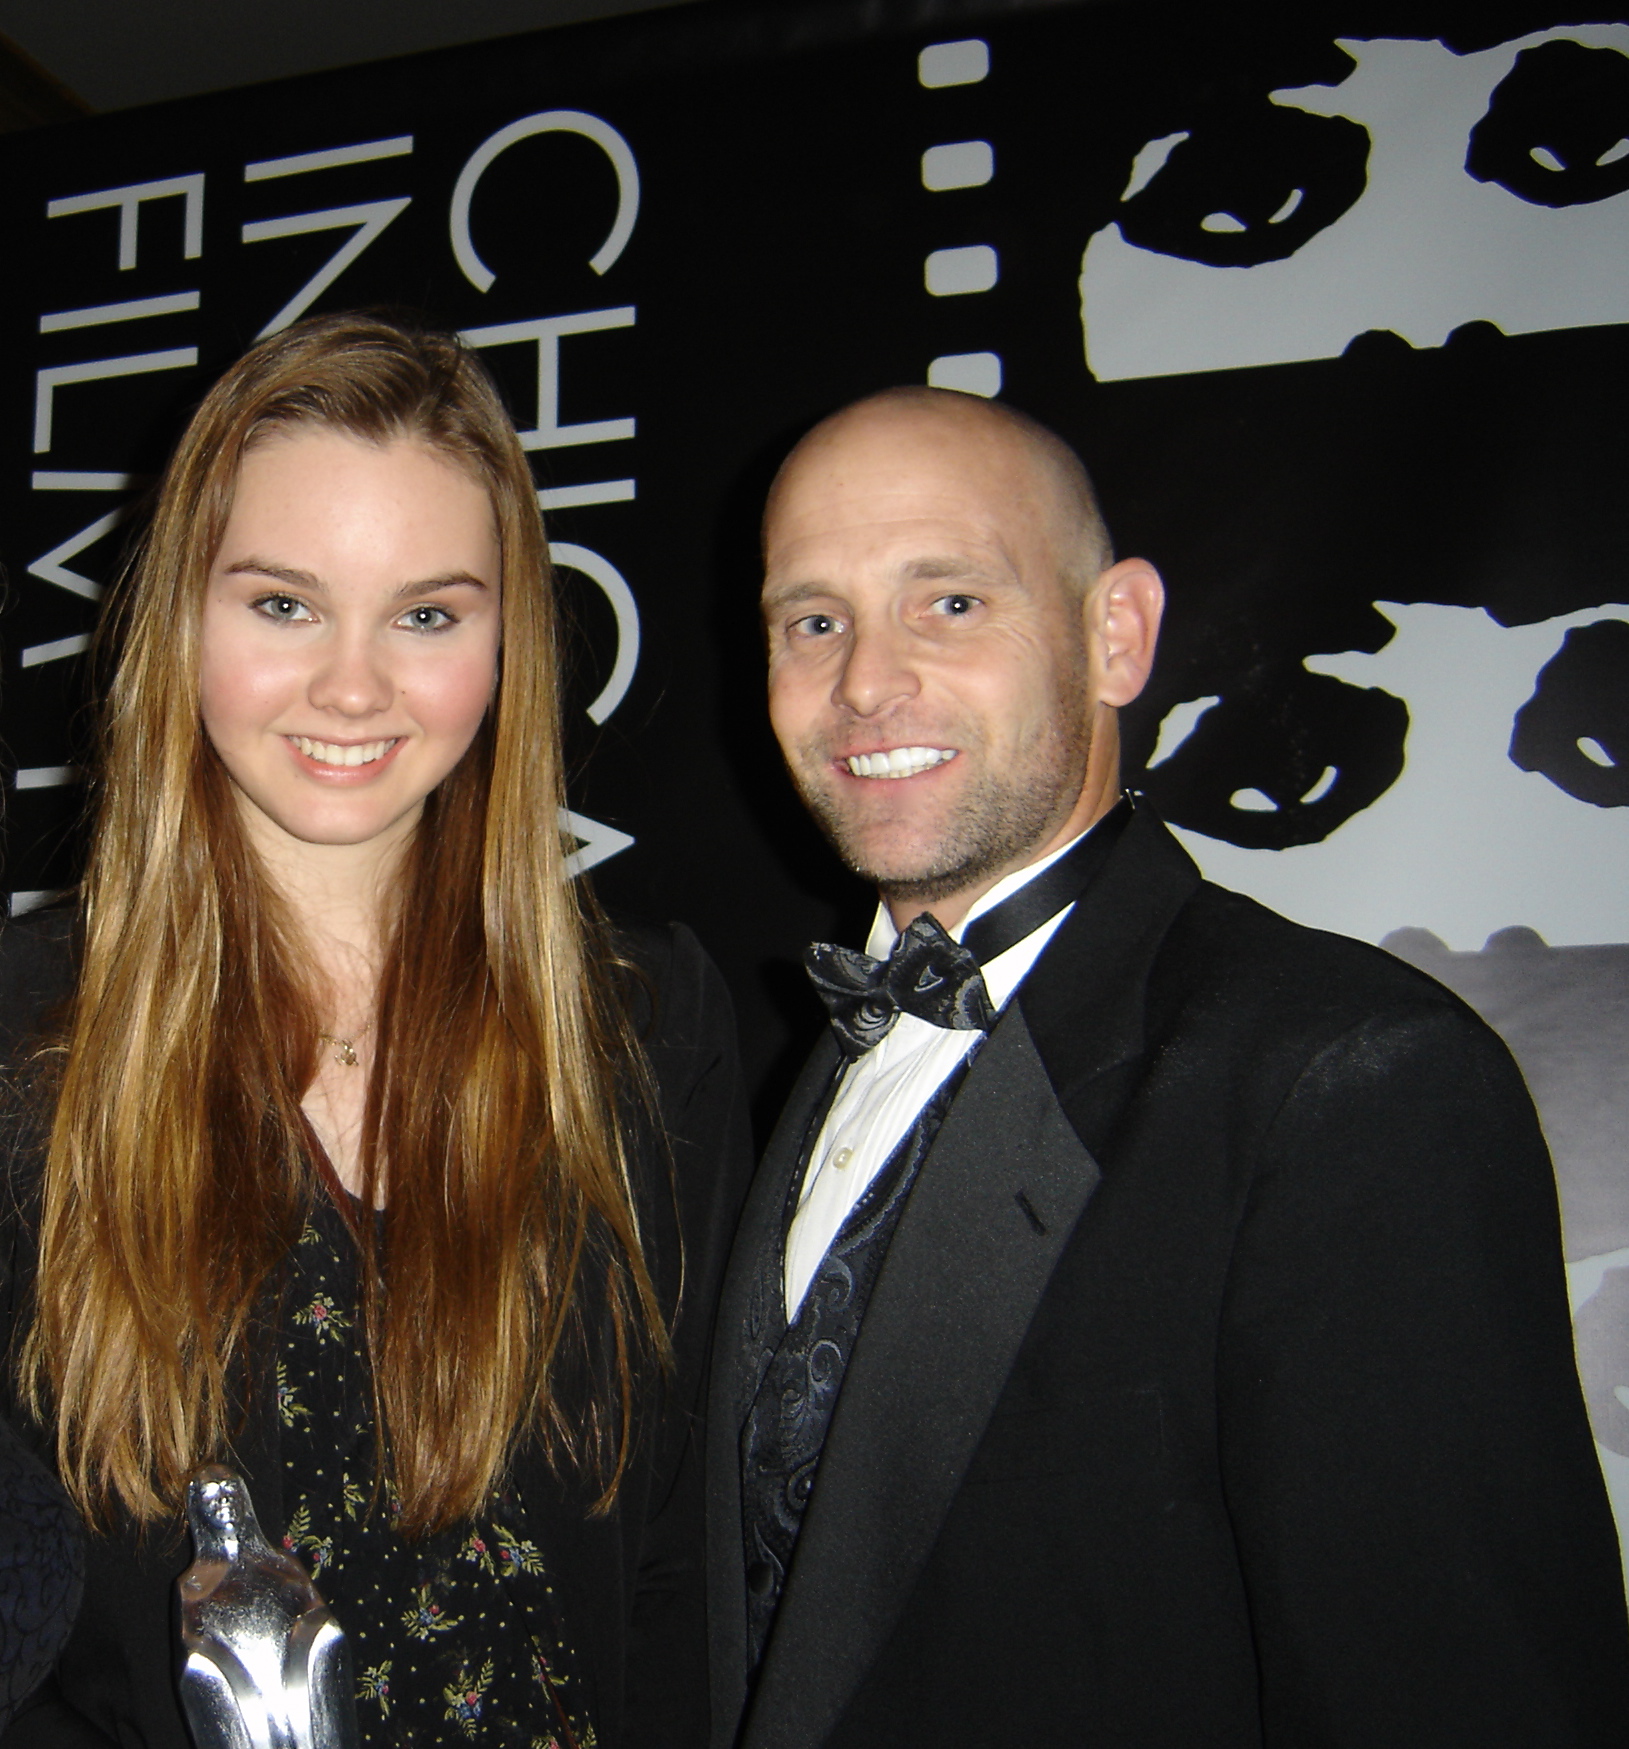 Producer Andy W. Meyer with actress Liana Liberato